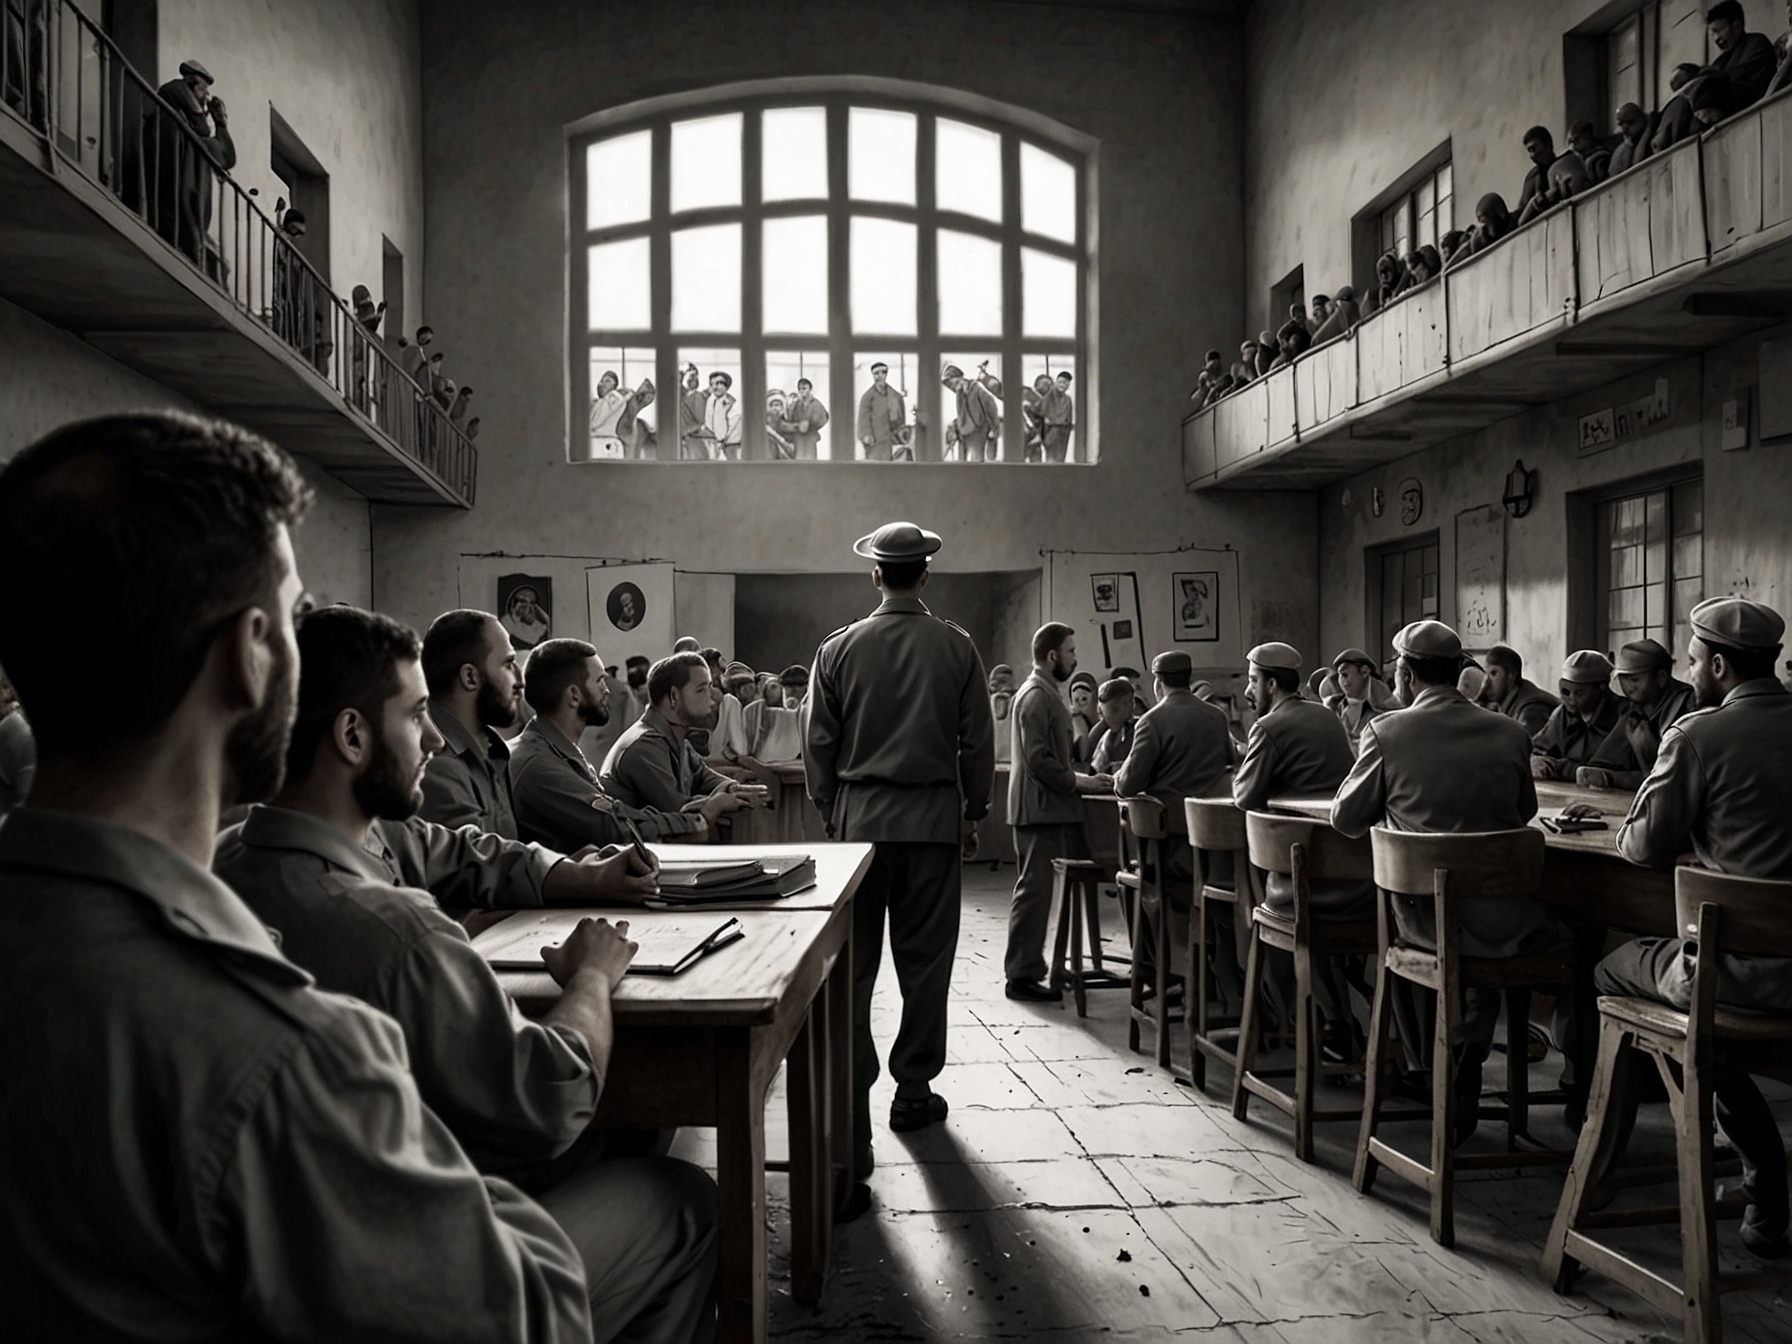 A modern Israeli scene with yeshiva students in the background and soldiers in the forefront, illustrating the ongoing debate over military service and religious obligations within Israel's Jewish communities.